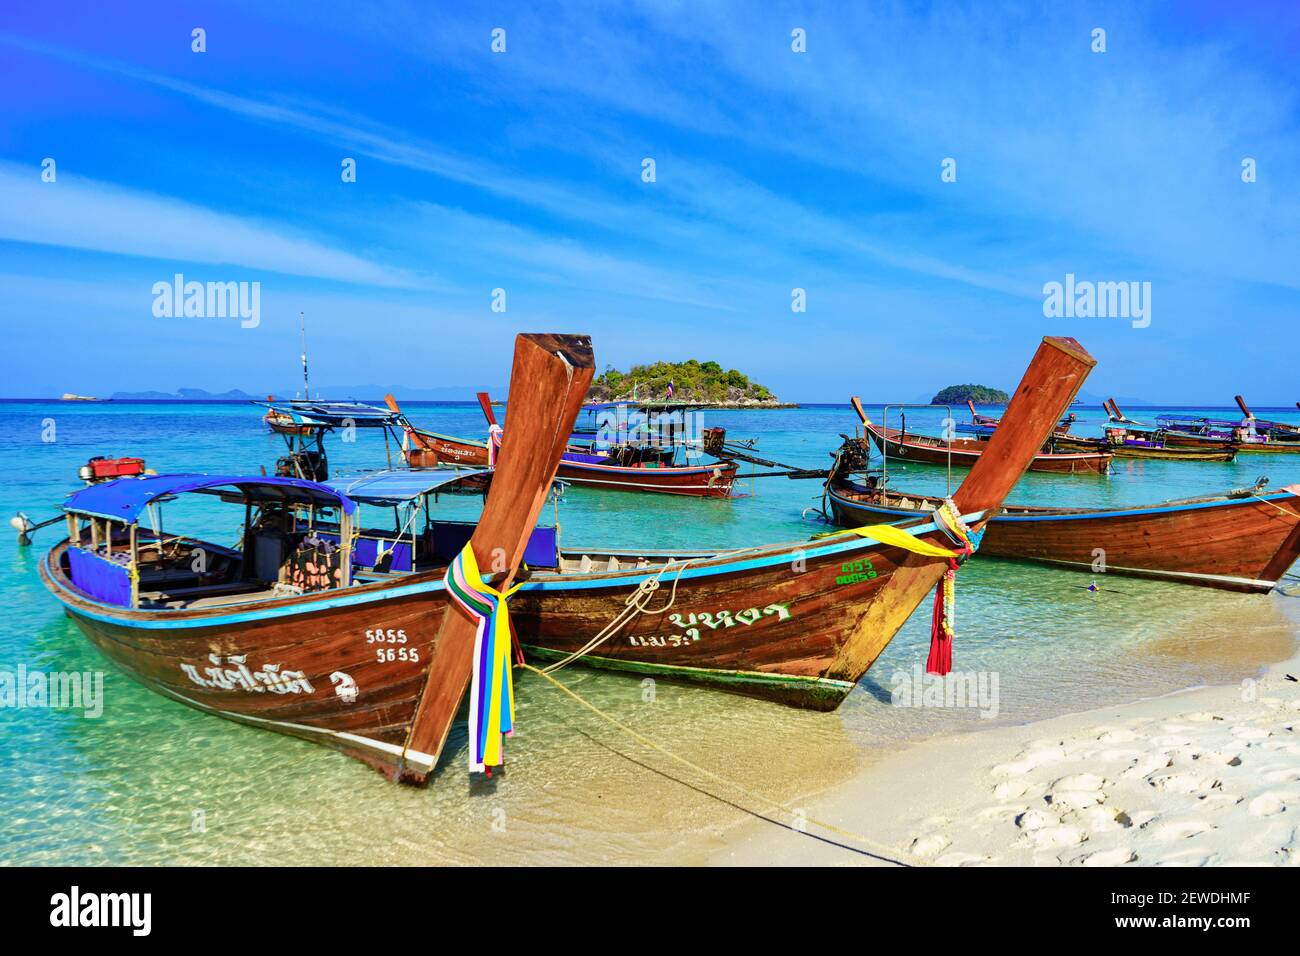 Traditional long tail fishing and tourist boats on Sunrise Beach, Koh Lipe island, Thailand, with blue sky Stock Photo